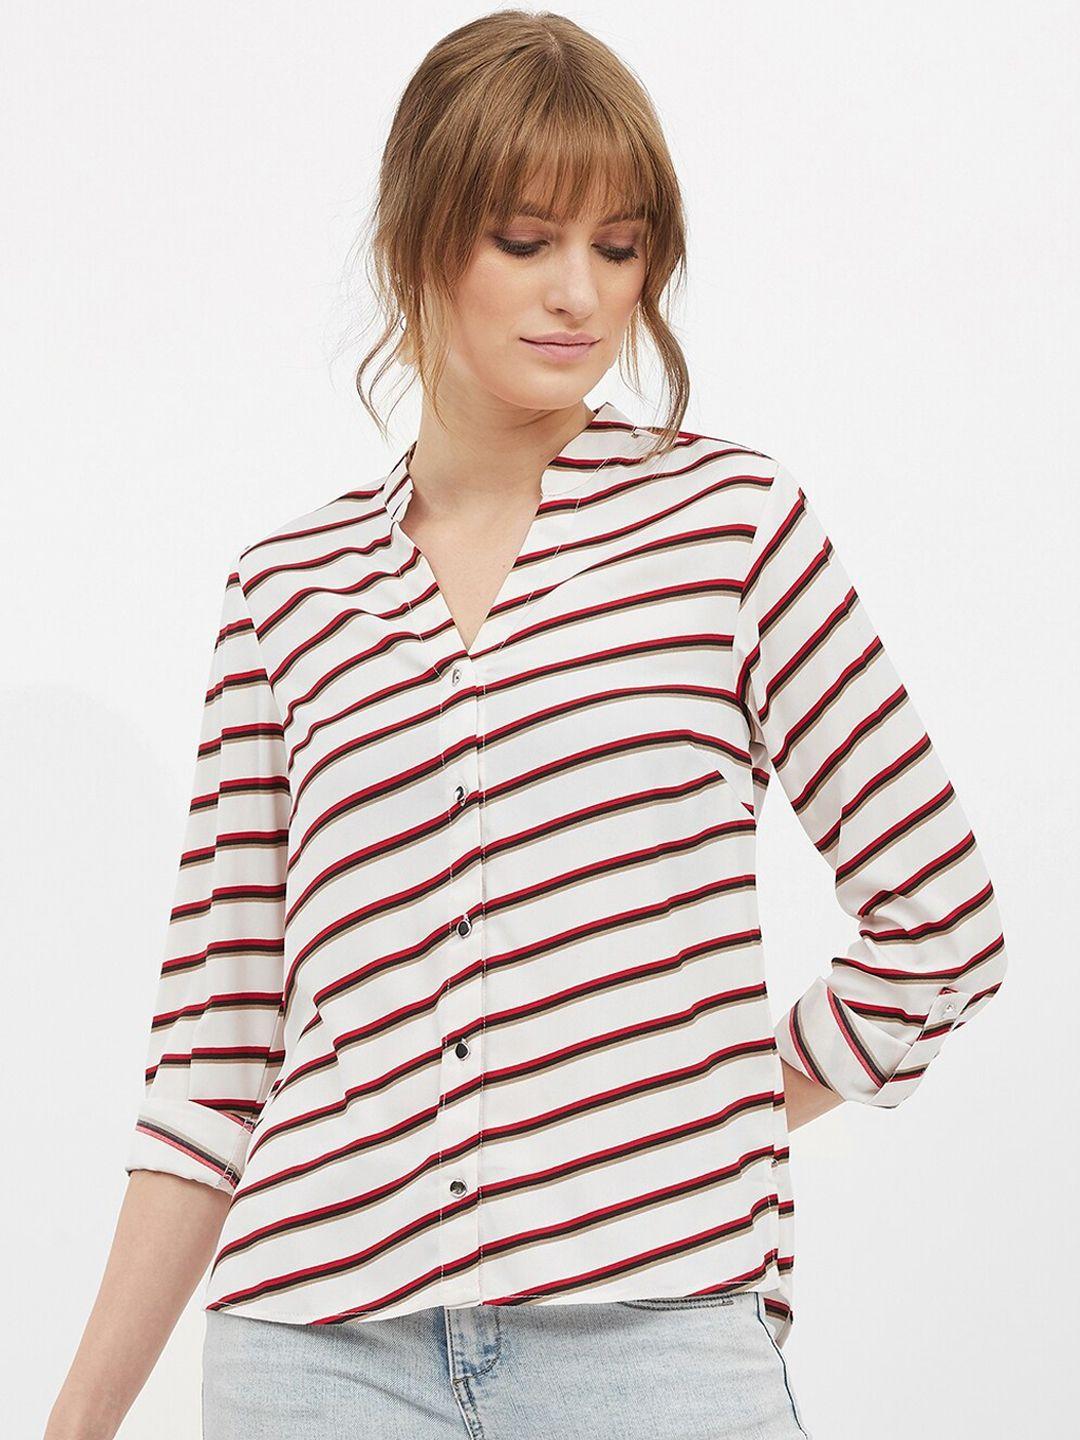 harpa women white & red striped shirt style top